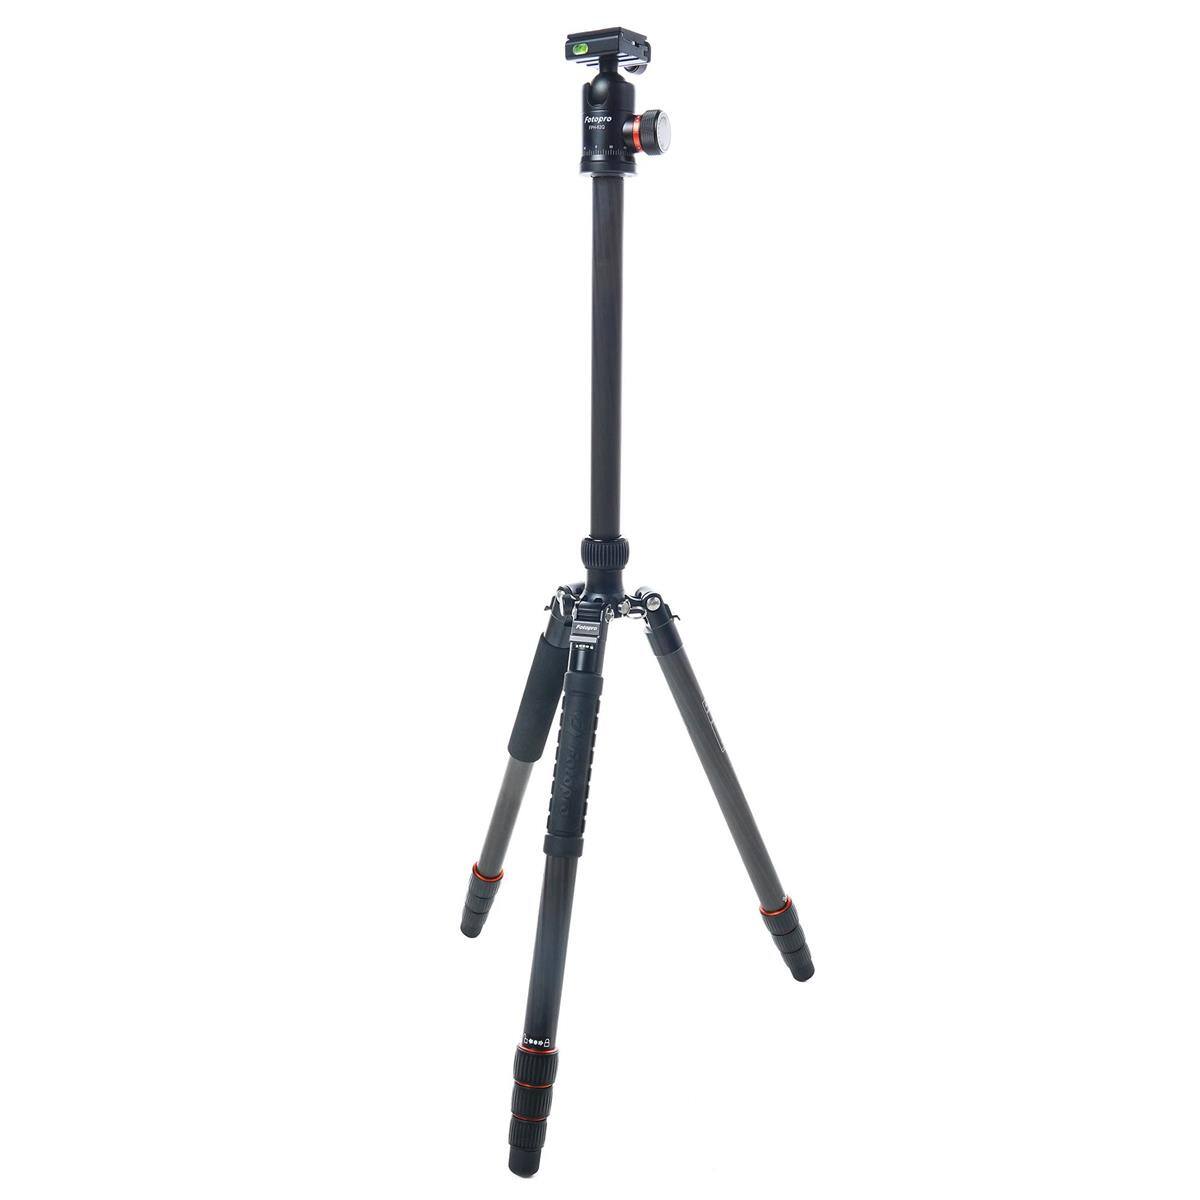 FotoPro X-Go Max 4-Section Carbon Fiber Tripod with Built-In Monopod $99 + free s/h at Adorama